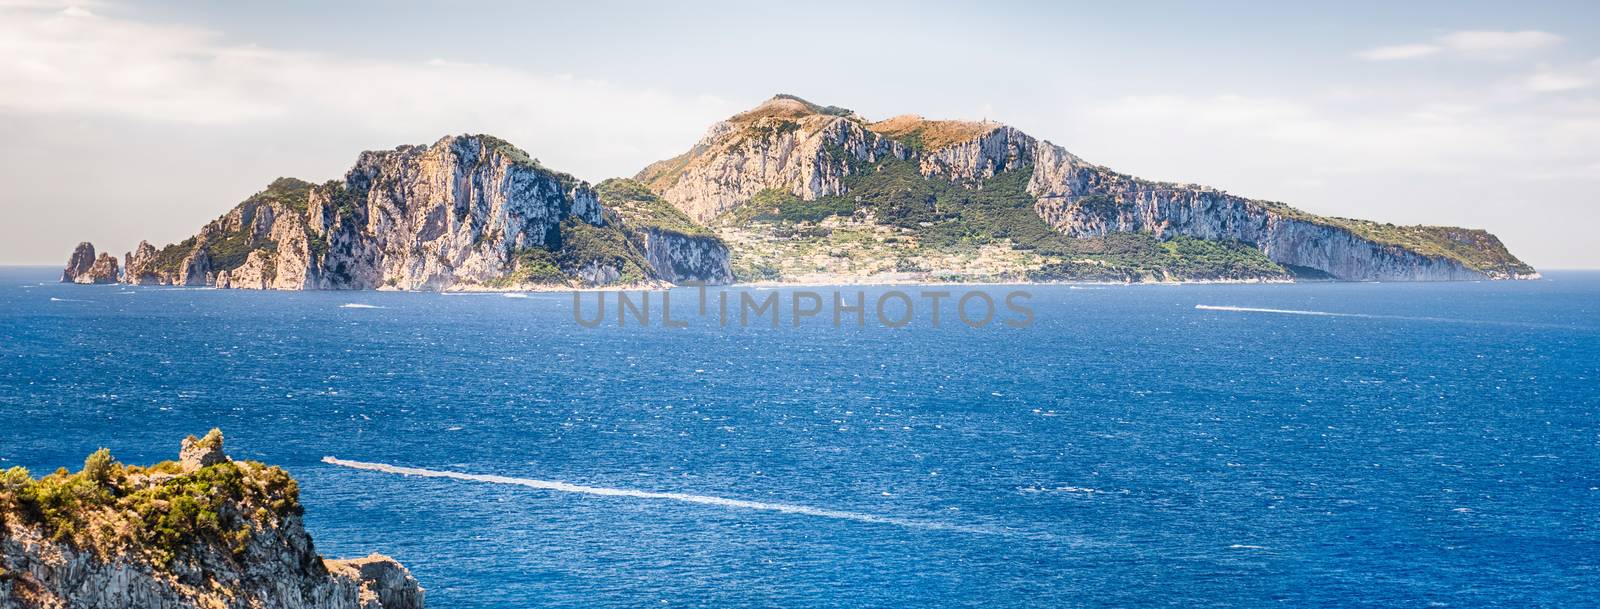 Scenic aerial view of the Island of Capri, Italy, as seen from the town of Massa Lubrense